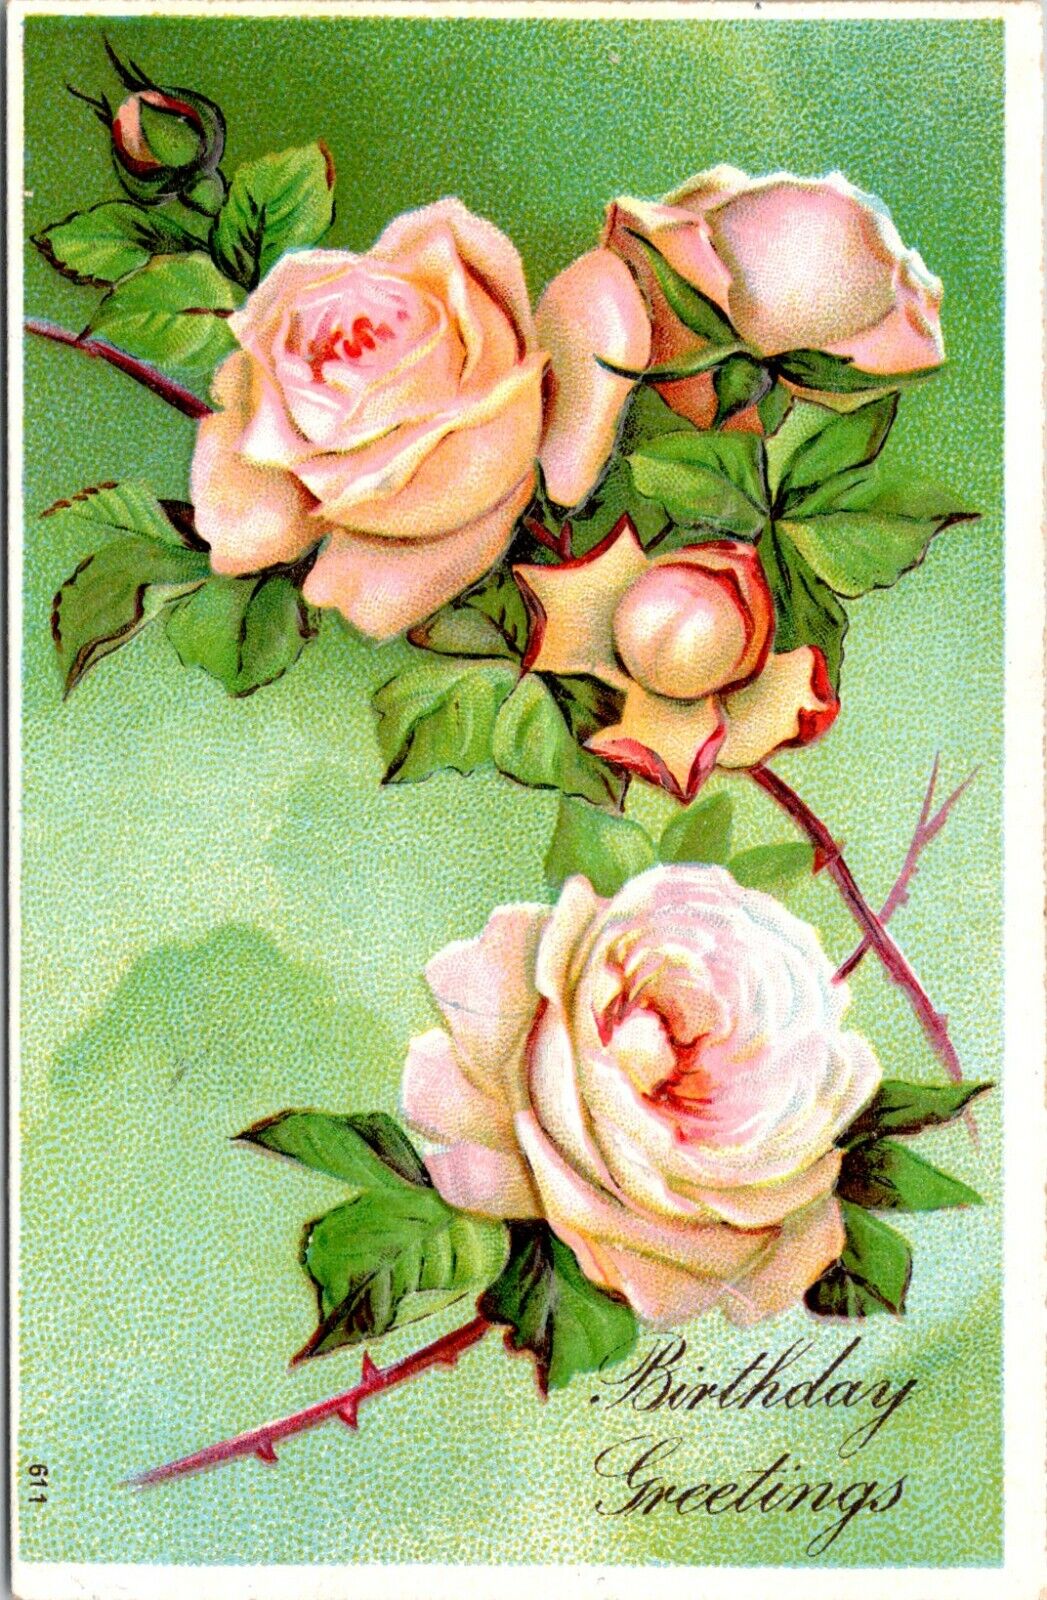 Pink Roses Birthday Greetings Postcard Posted 1911